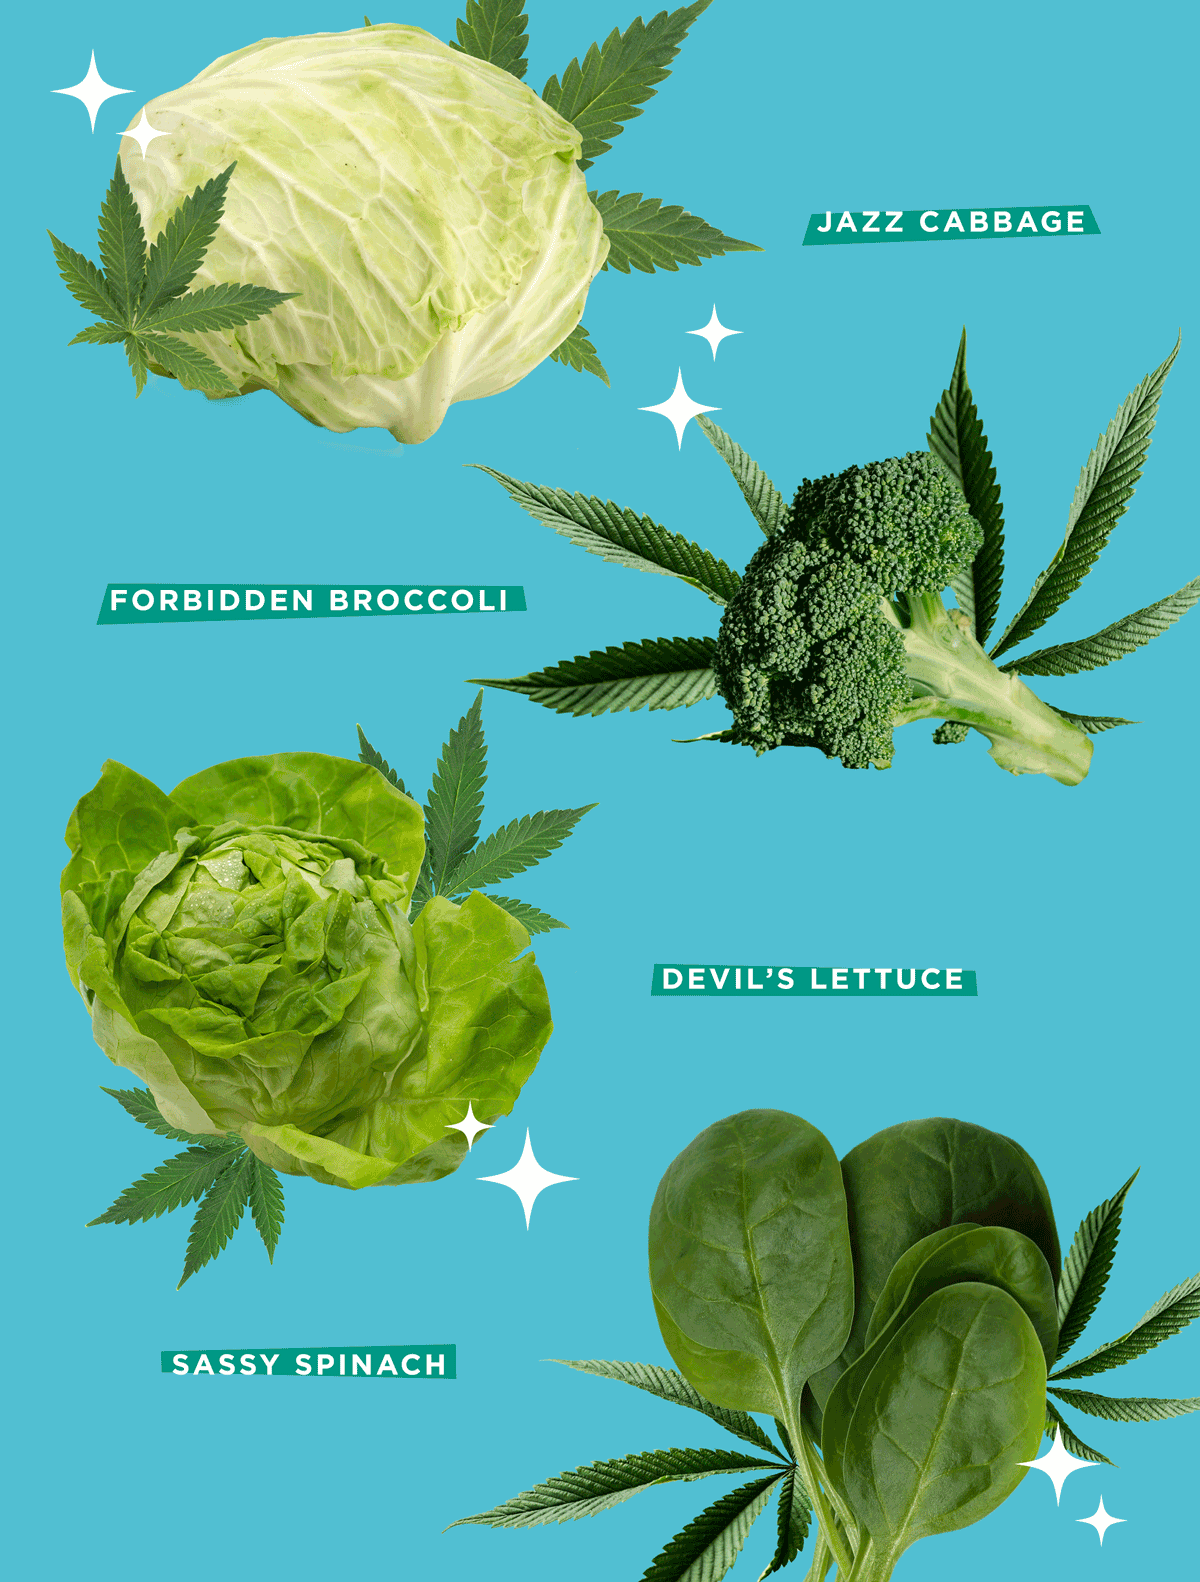 Transform your crops into THC-infused edibles!